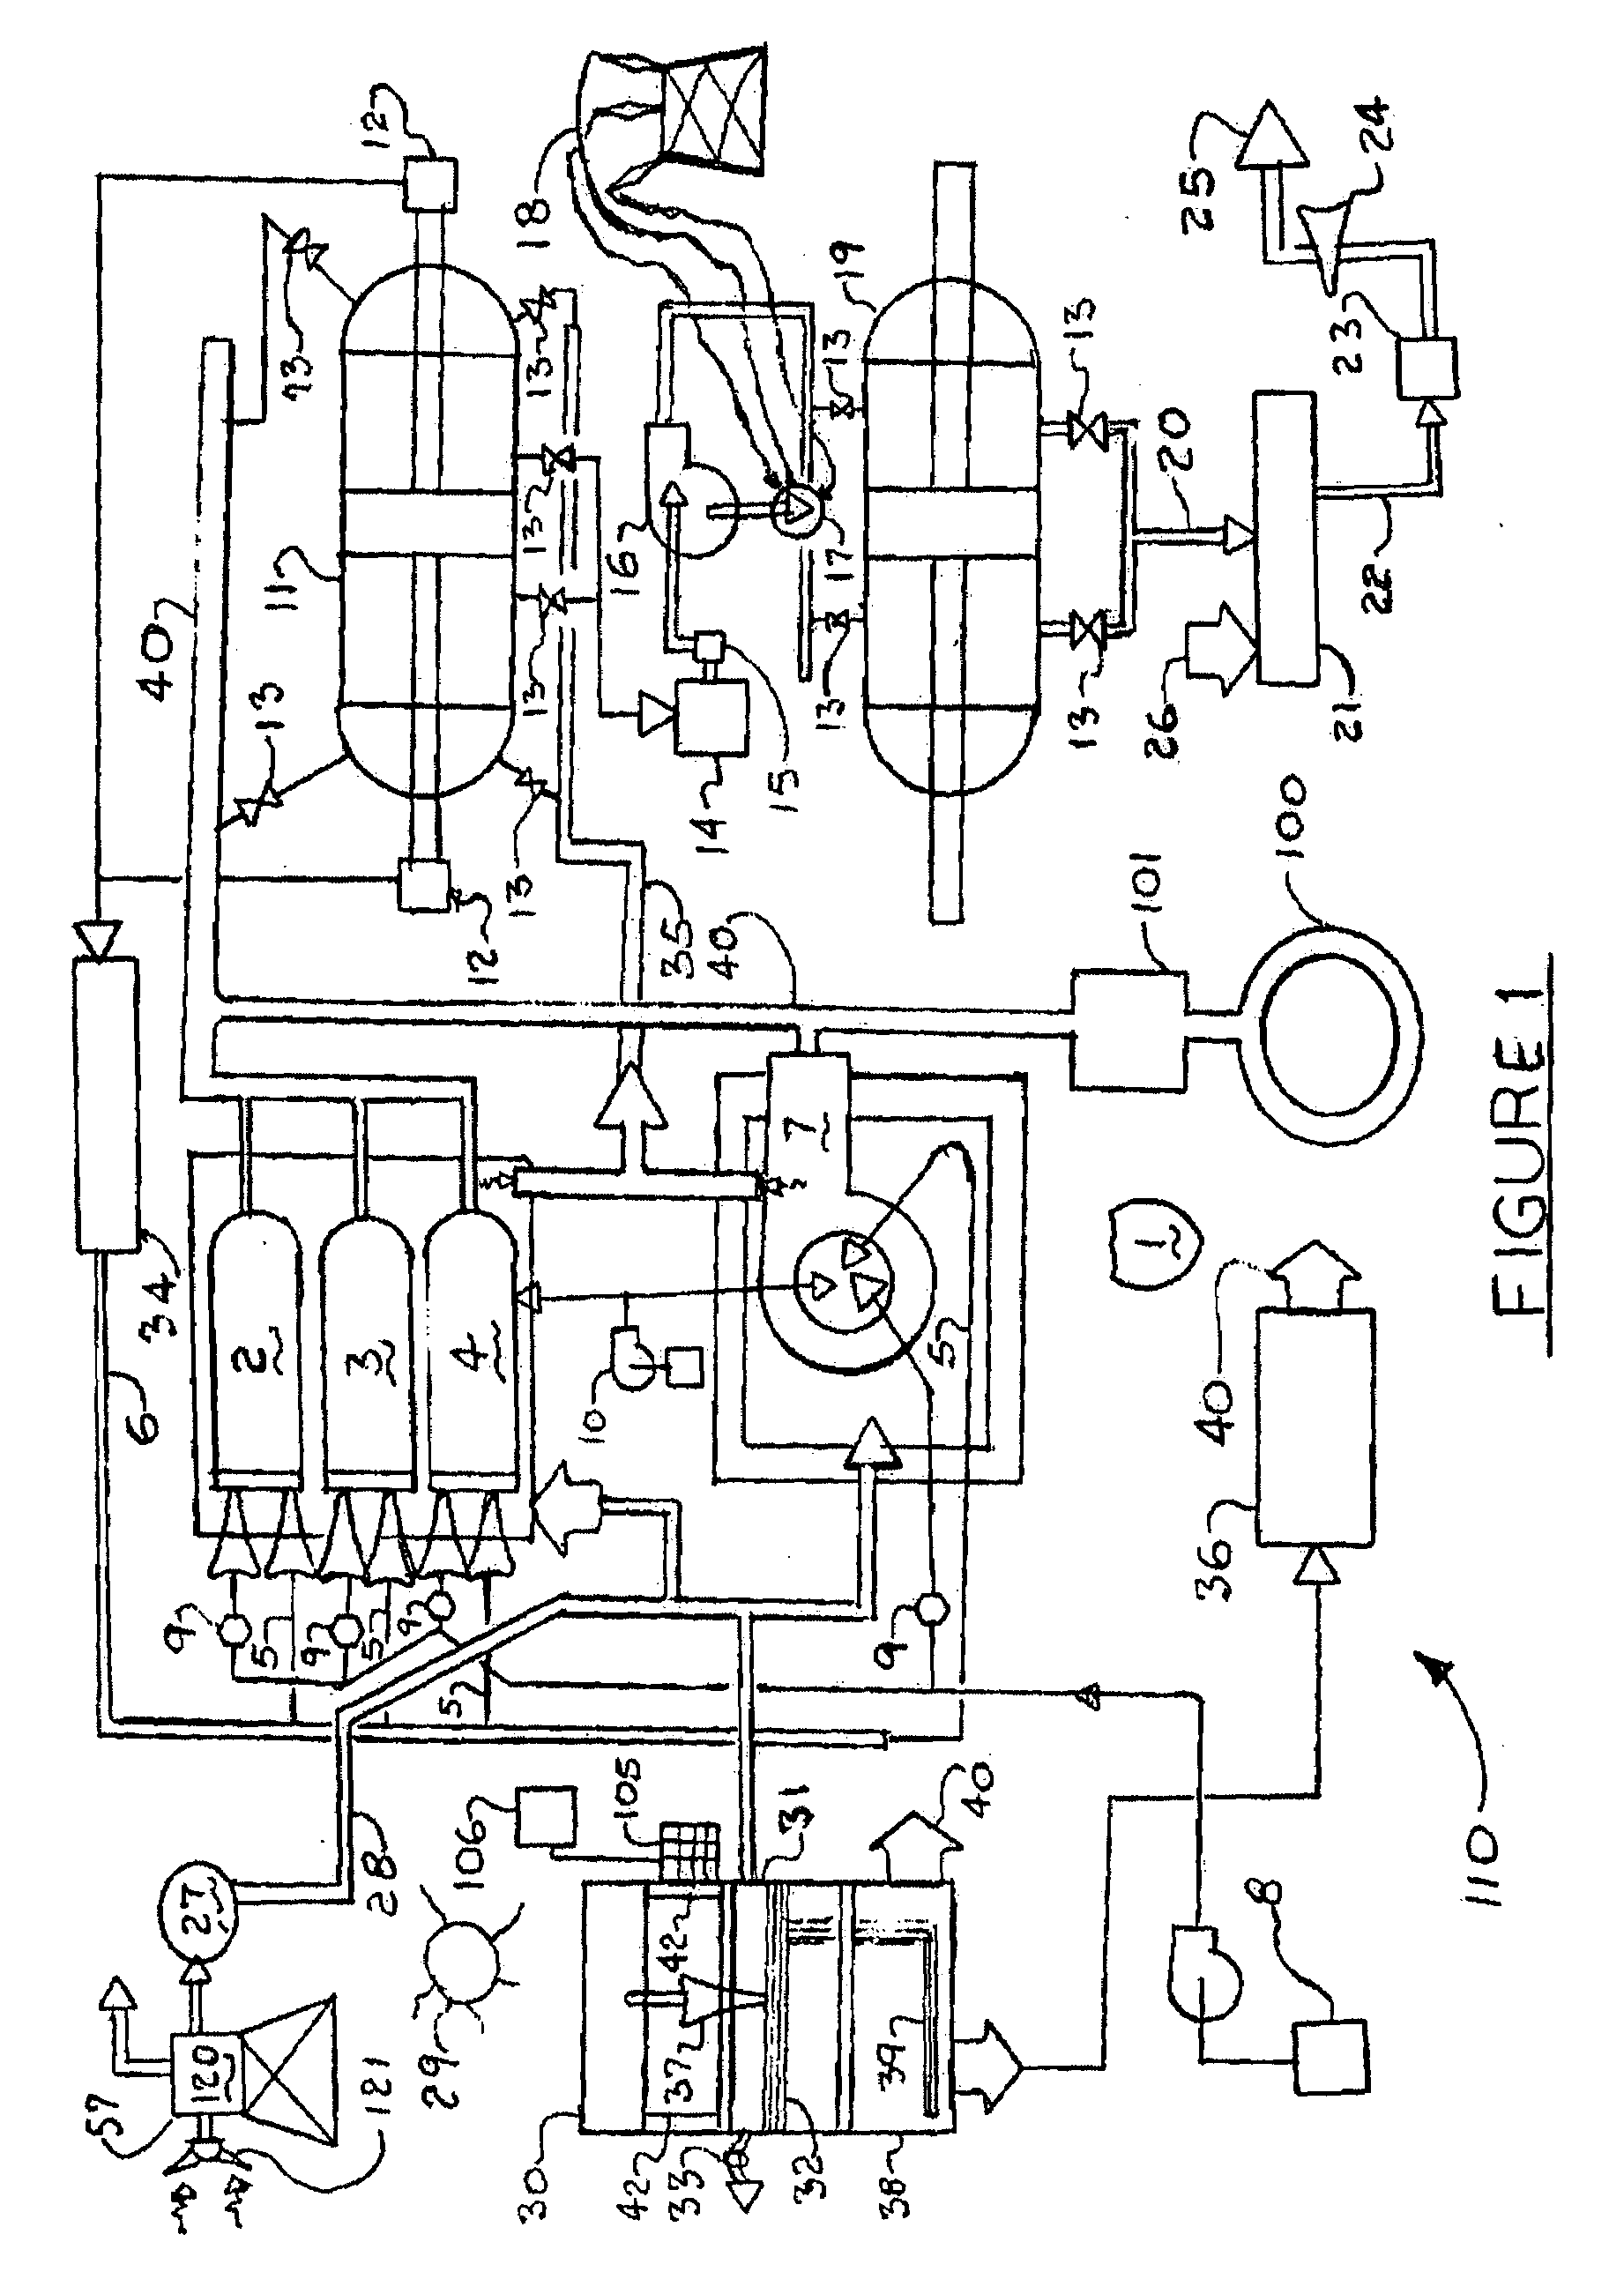 Power generating systems and methods